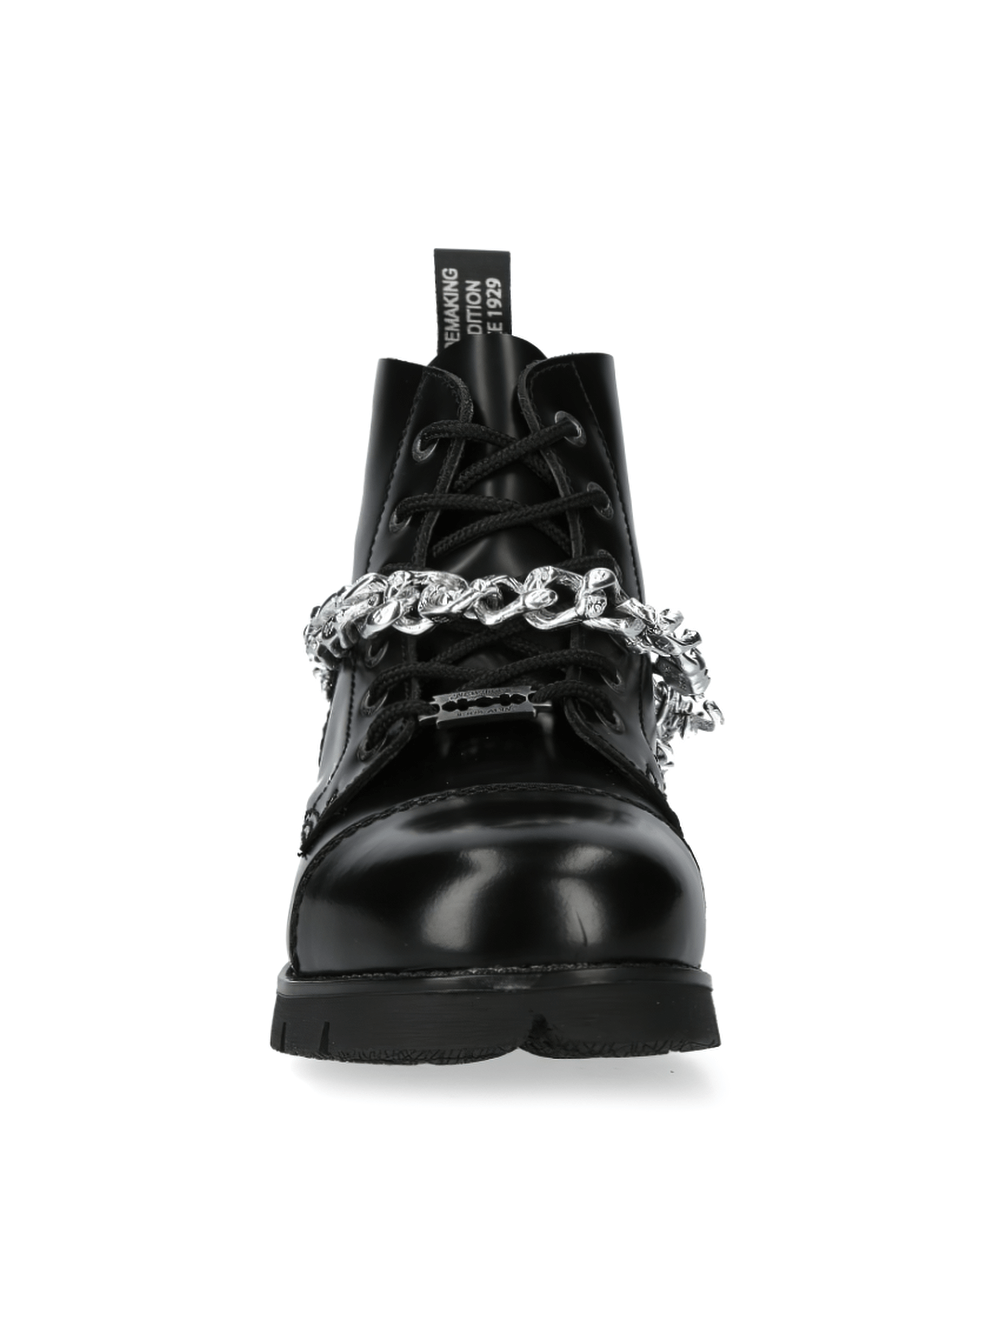 NEW ROCK Chained Black Leather Ranger Ankle Boots